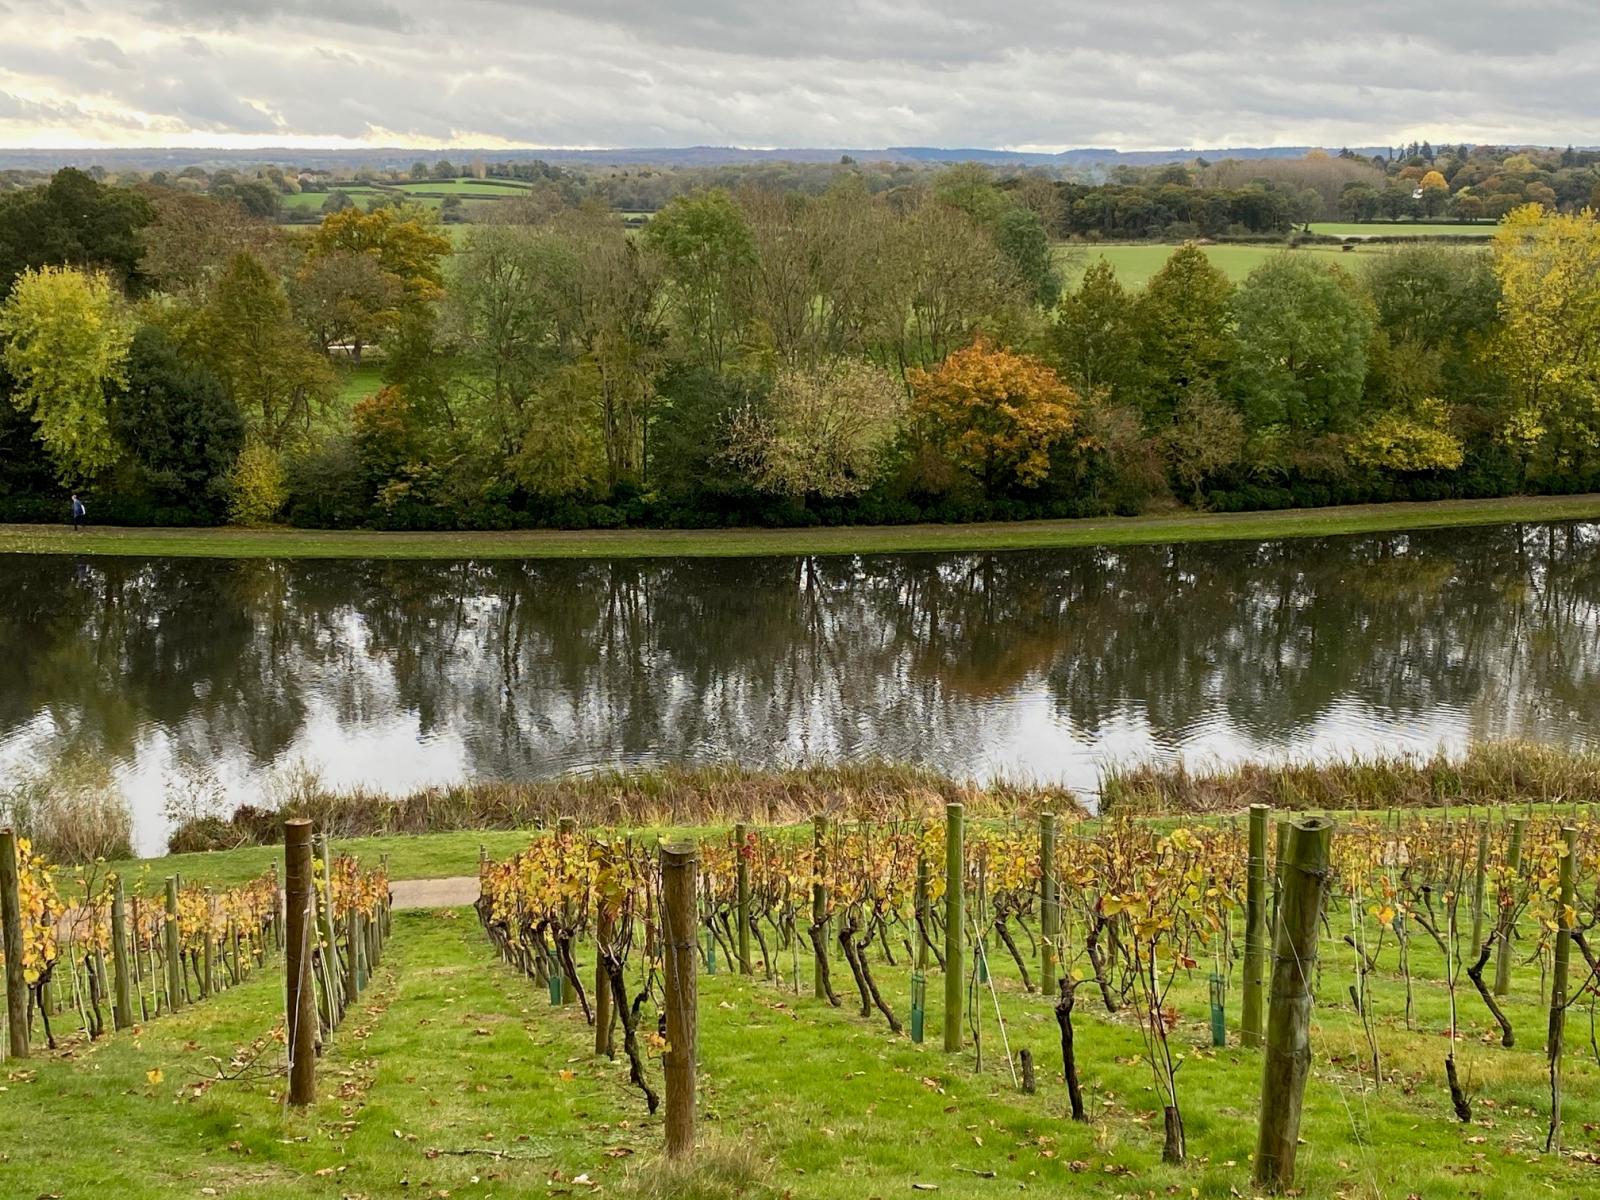 Painshill Park View to the South over Vineyard